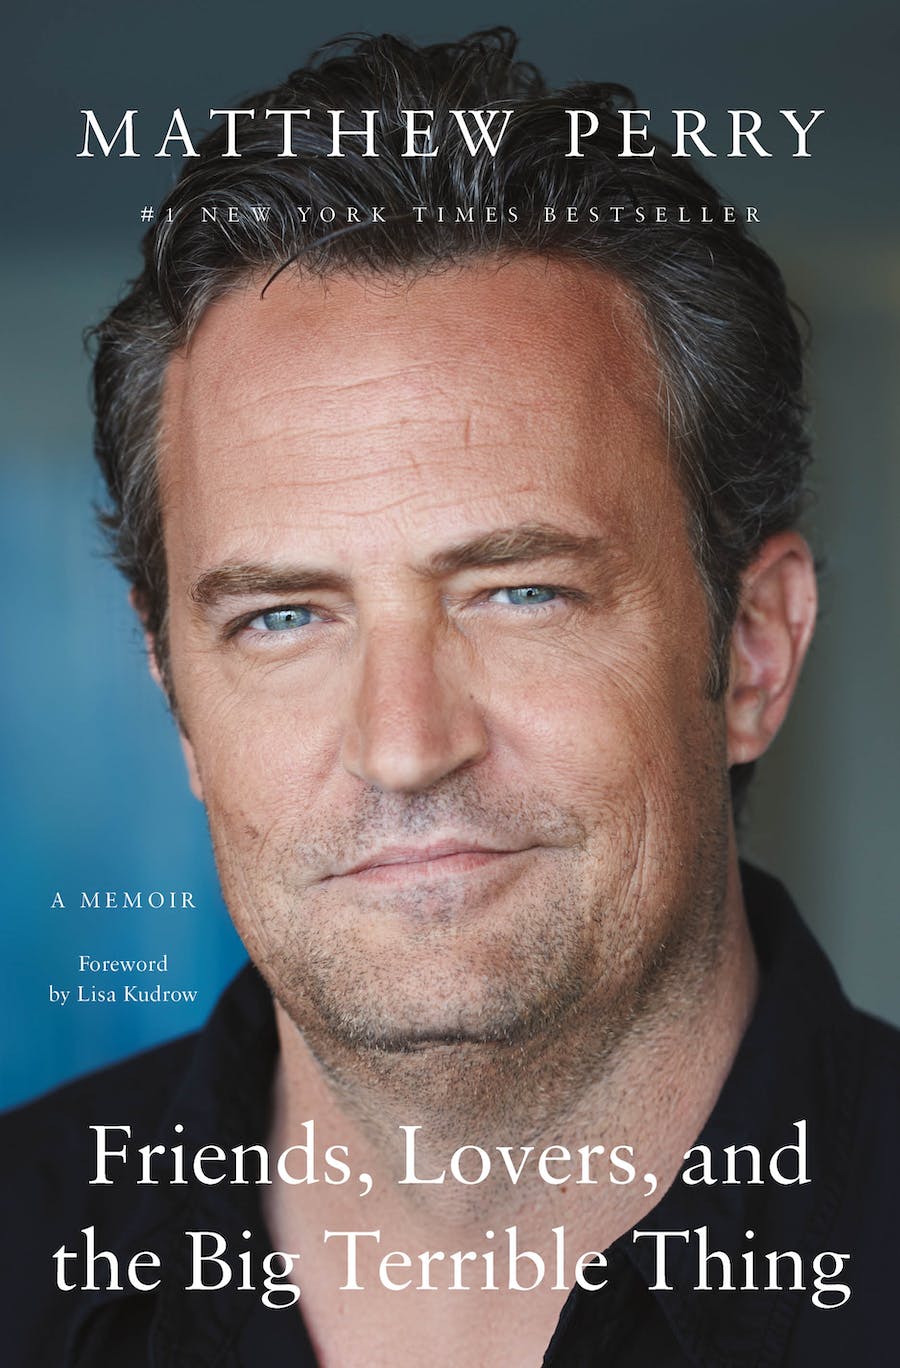 Book cover of Friends, Lovers and the Big Terrible Thing with a half smiling Matthew Perry portrait on the cover